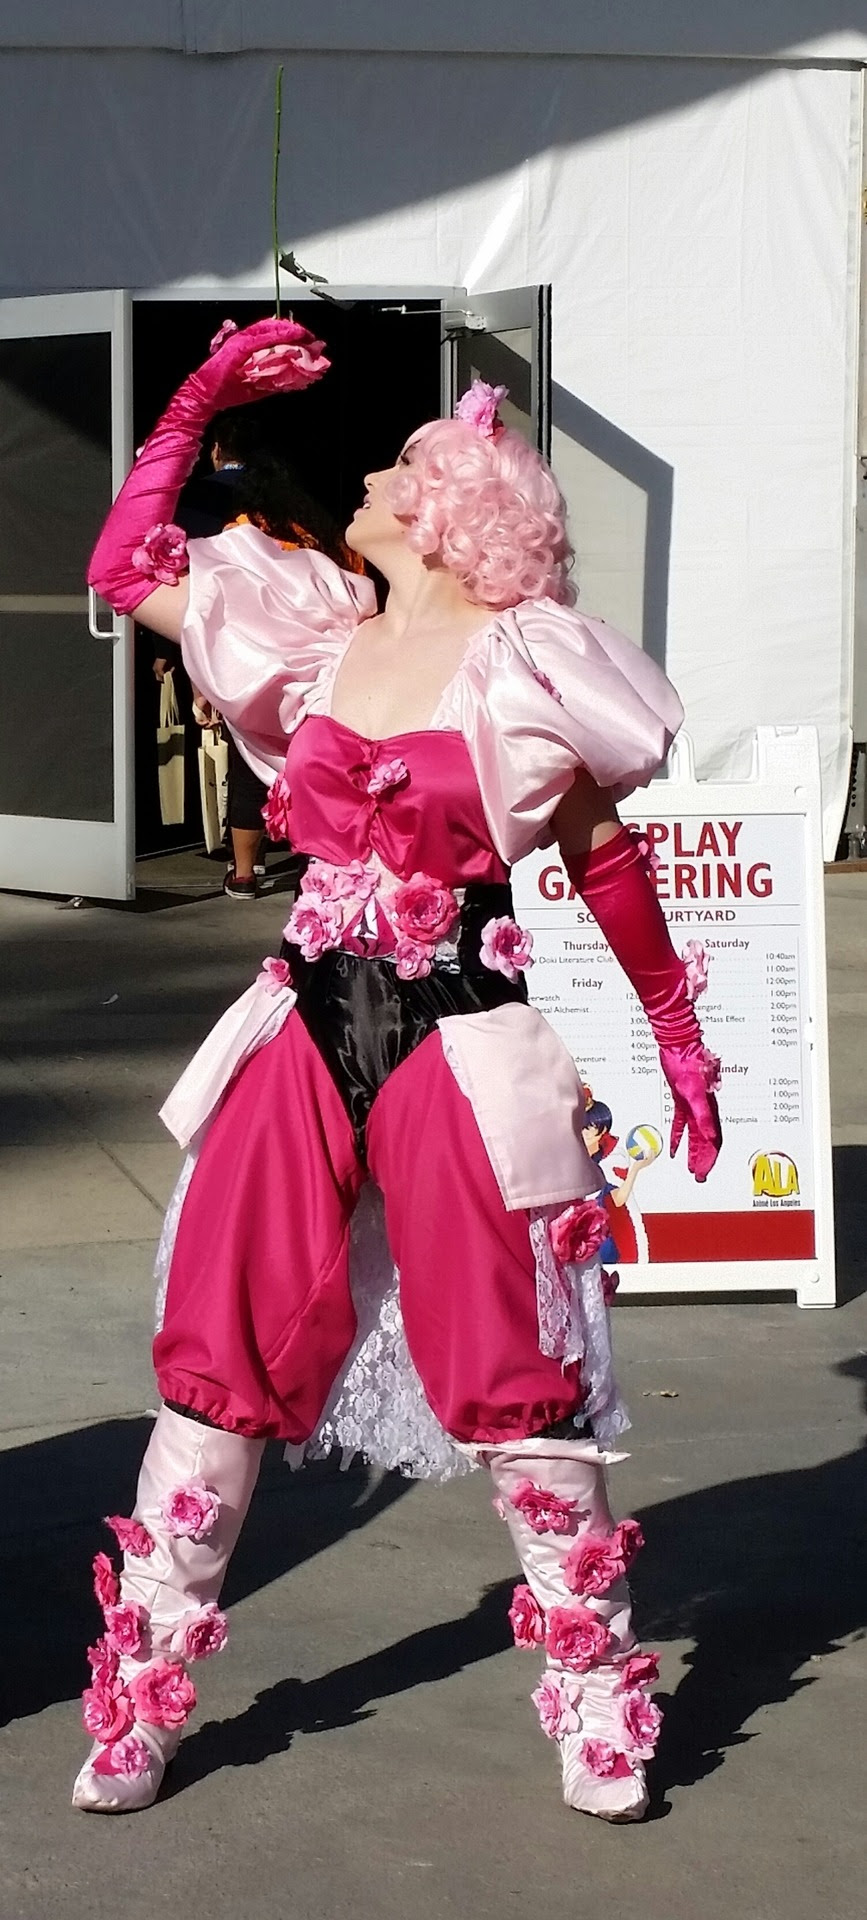 gaygemgoddess: “Some highlights from the Anime Los Angeles Steven Universe Photoshoot. ” More Rose Quartz and Pink Diamond.